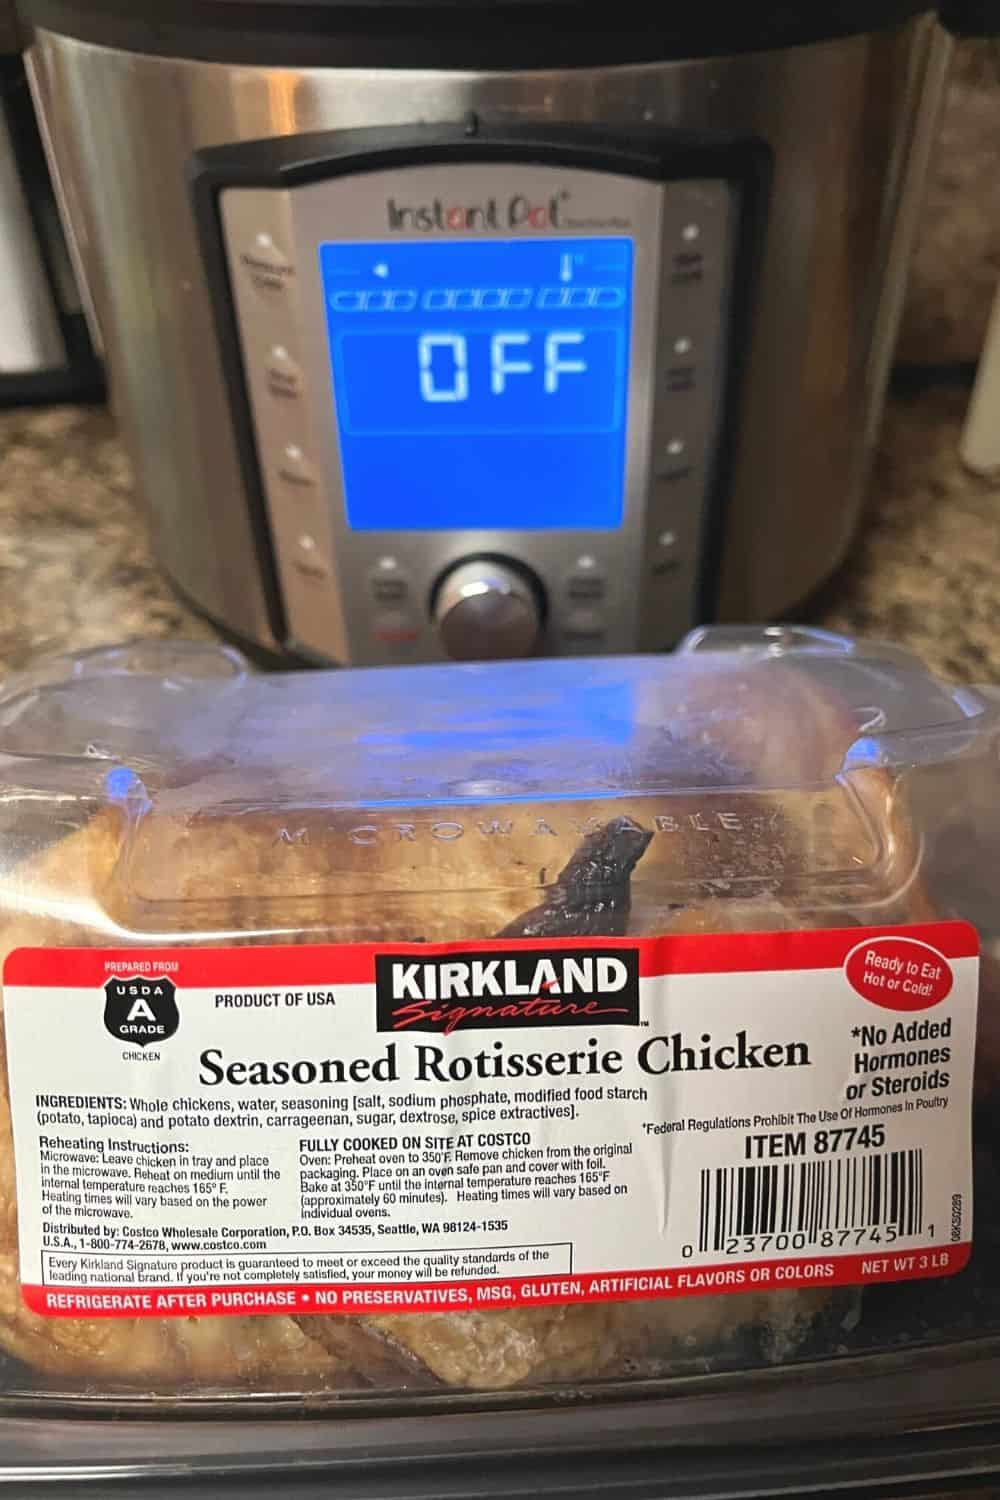 Kirkland signature rotisserie chicken from Costco in front of an Instant Pot